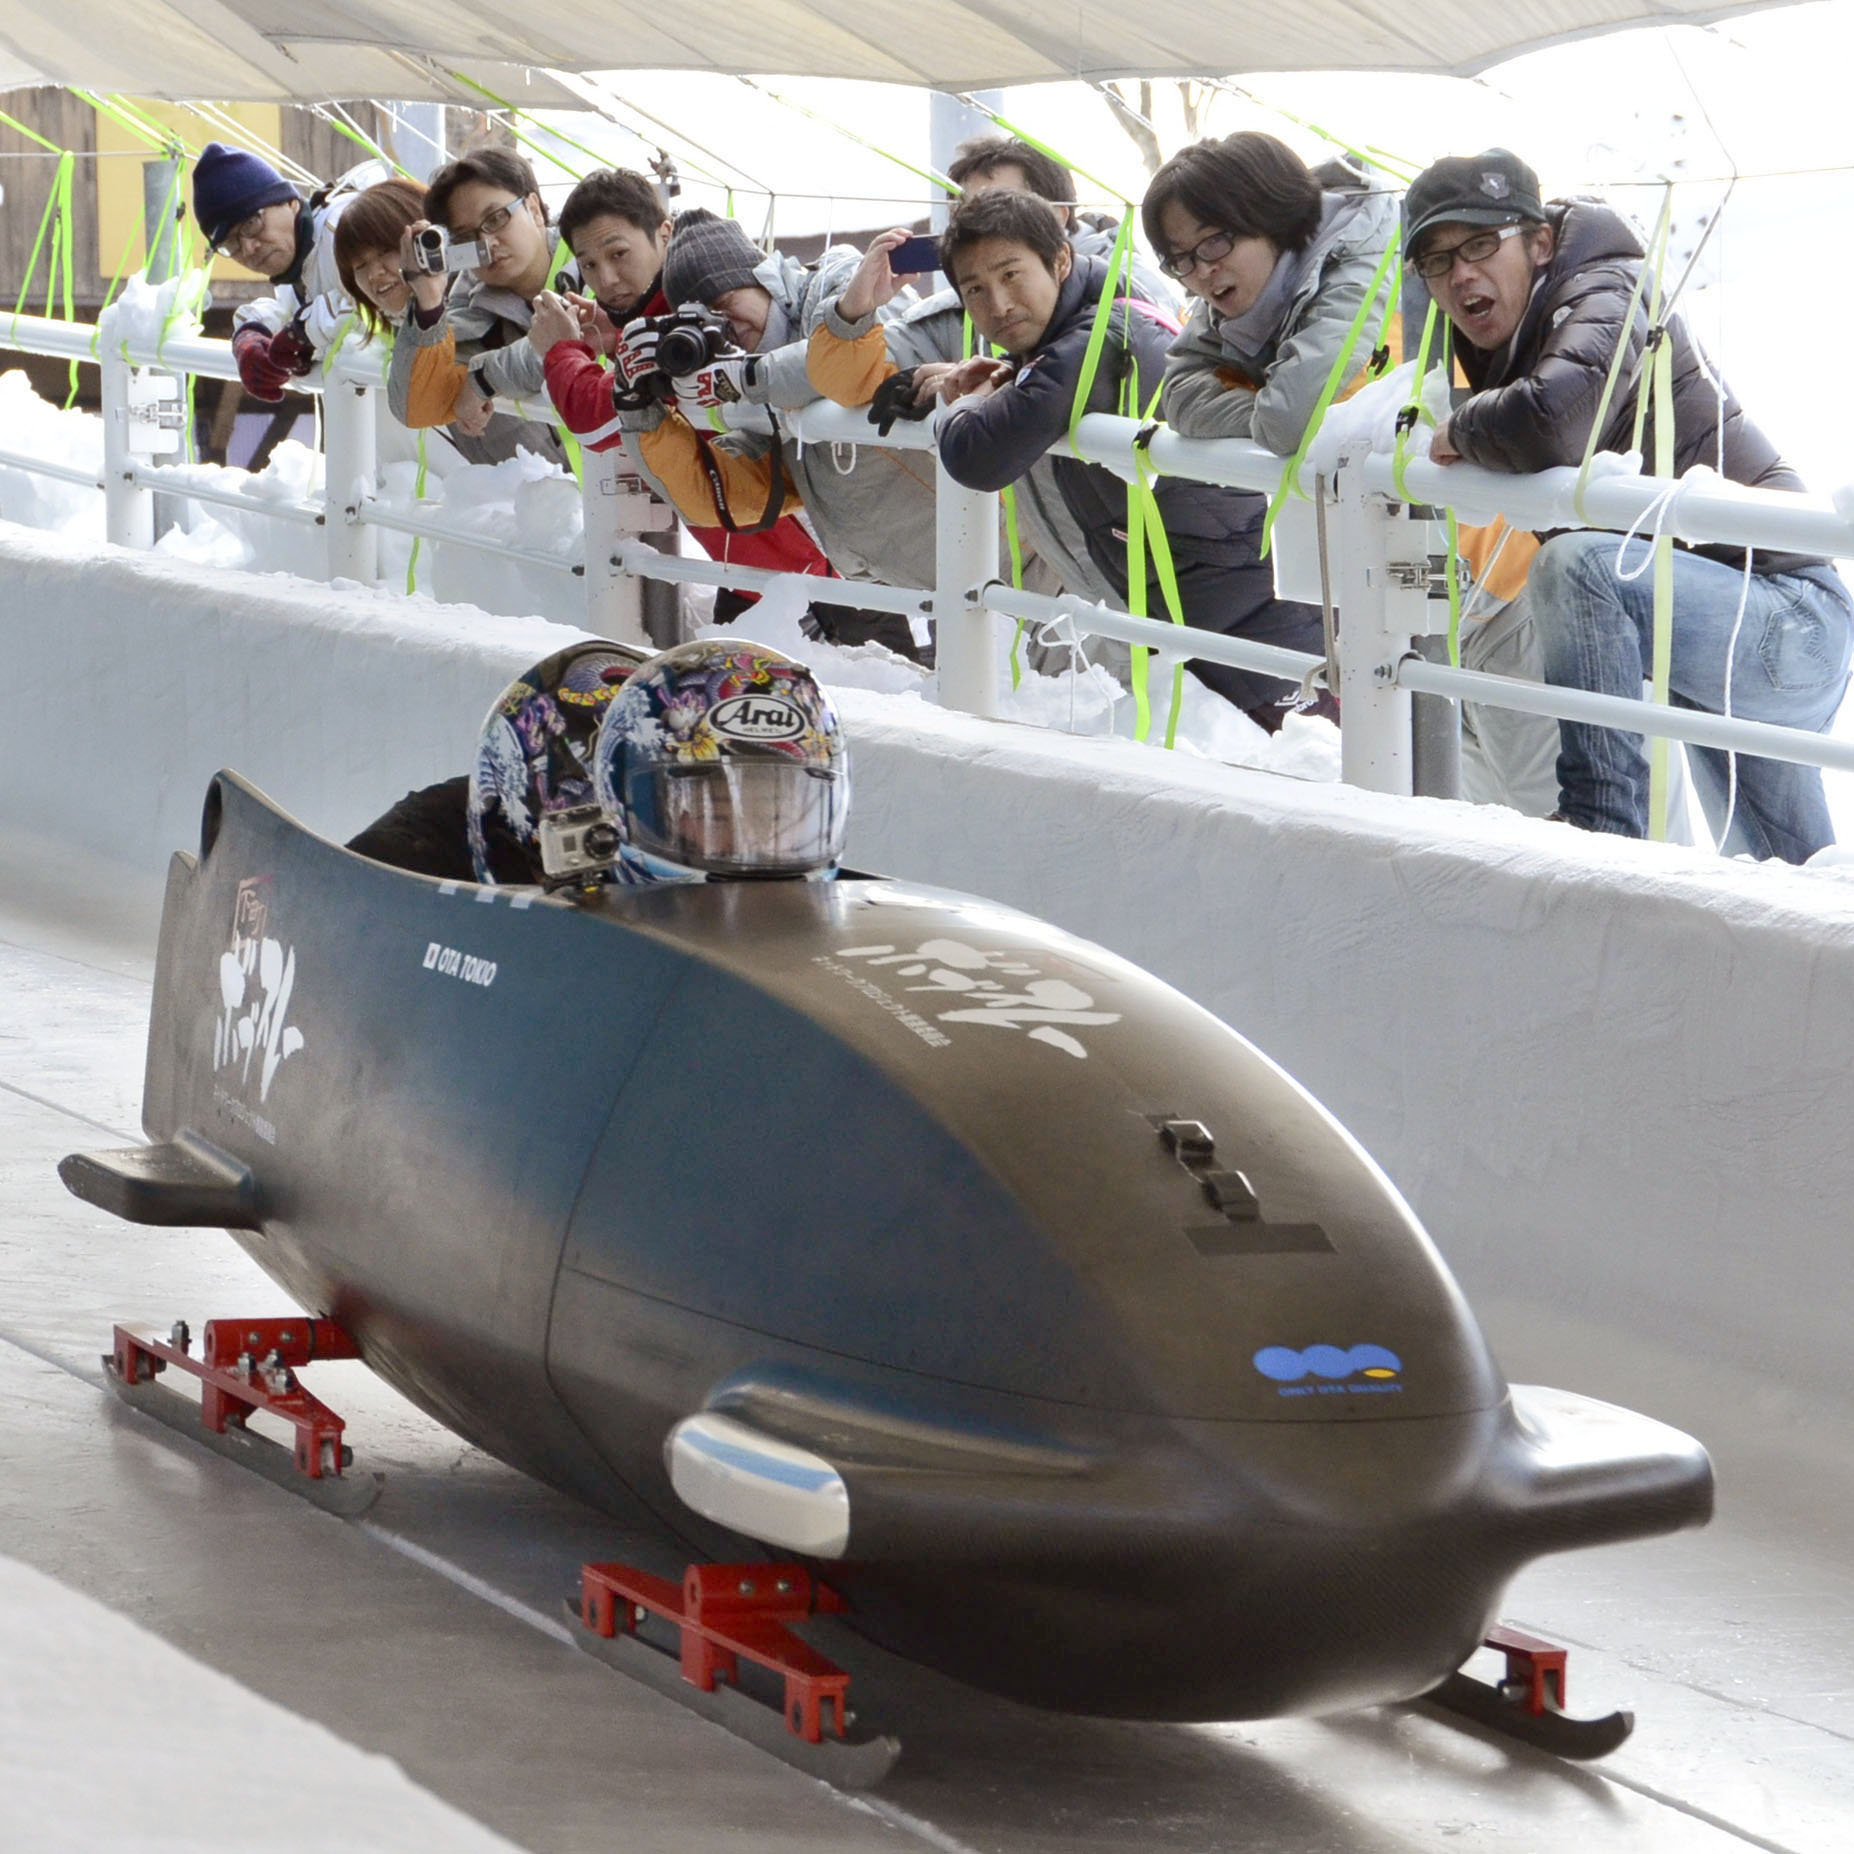 Bob in the track: Developers of the nation's first bobsled watch a December test run in the city of Nagano. | KYODO